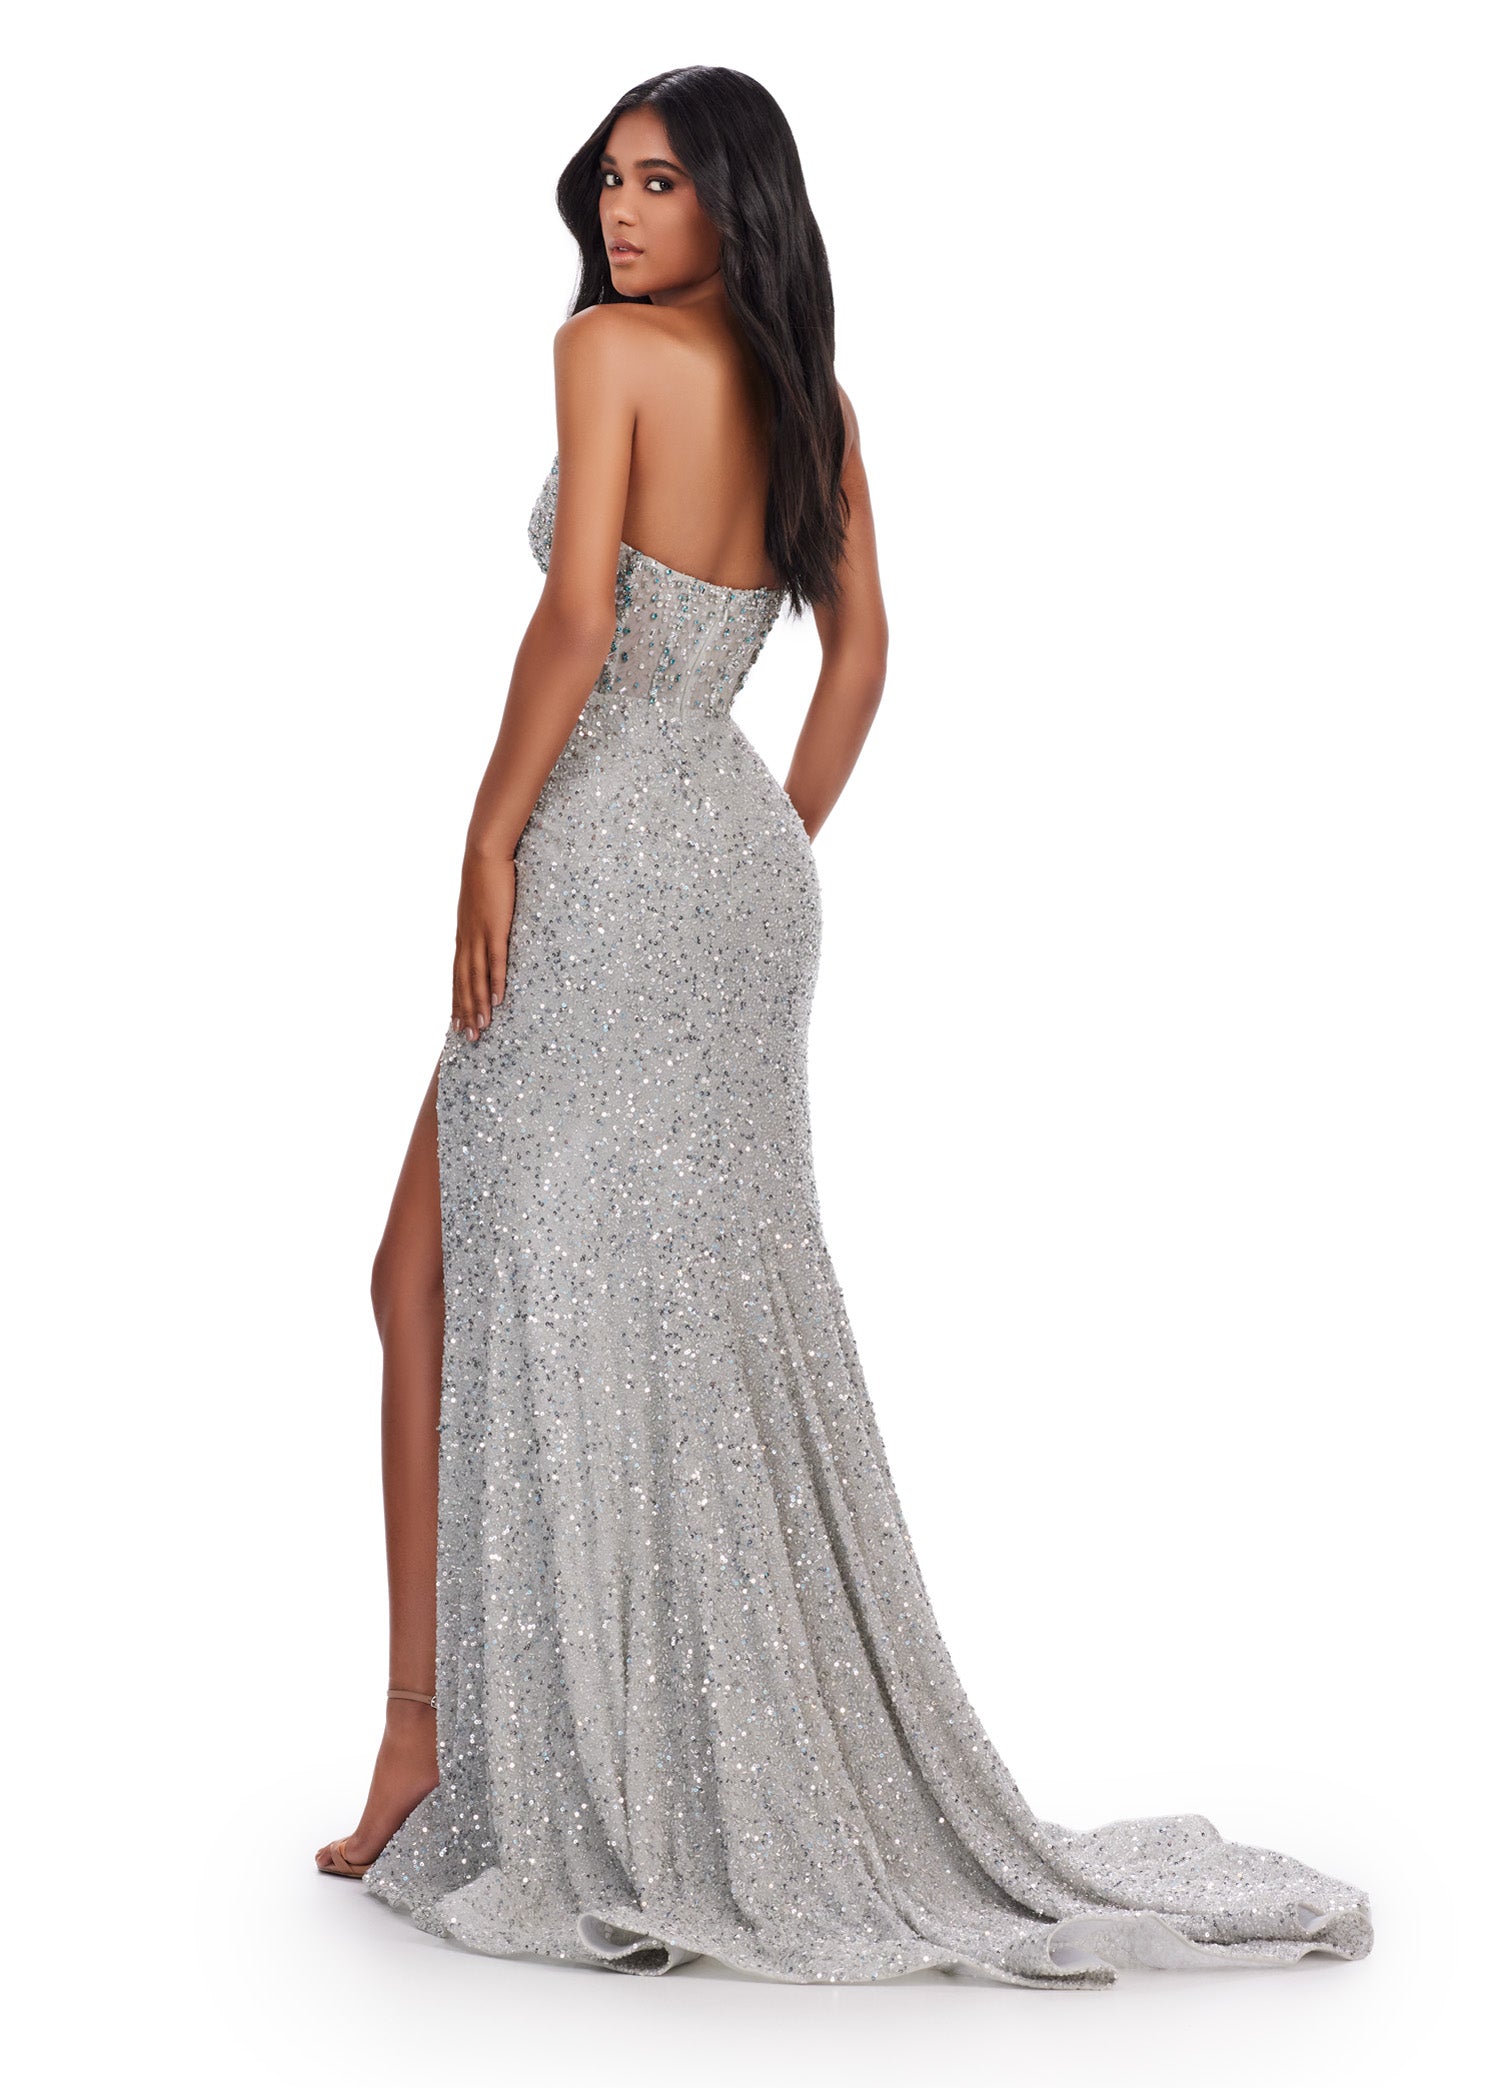 Elevate your formal look with the Ashley Lauren 11648 Long Prom Dress. Stunningly designed with a strapless, beaded corset bustier and a stylish slit, this gown exudes elegance and sophistication. Perfect for pageants and prom, it's sure to make a lasting impression. A fully beaded gown sure to make you feel like a queen! This dress features an illusion corset bustier and left leg slit.